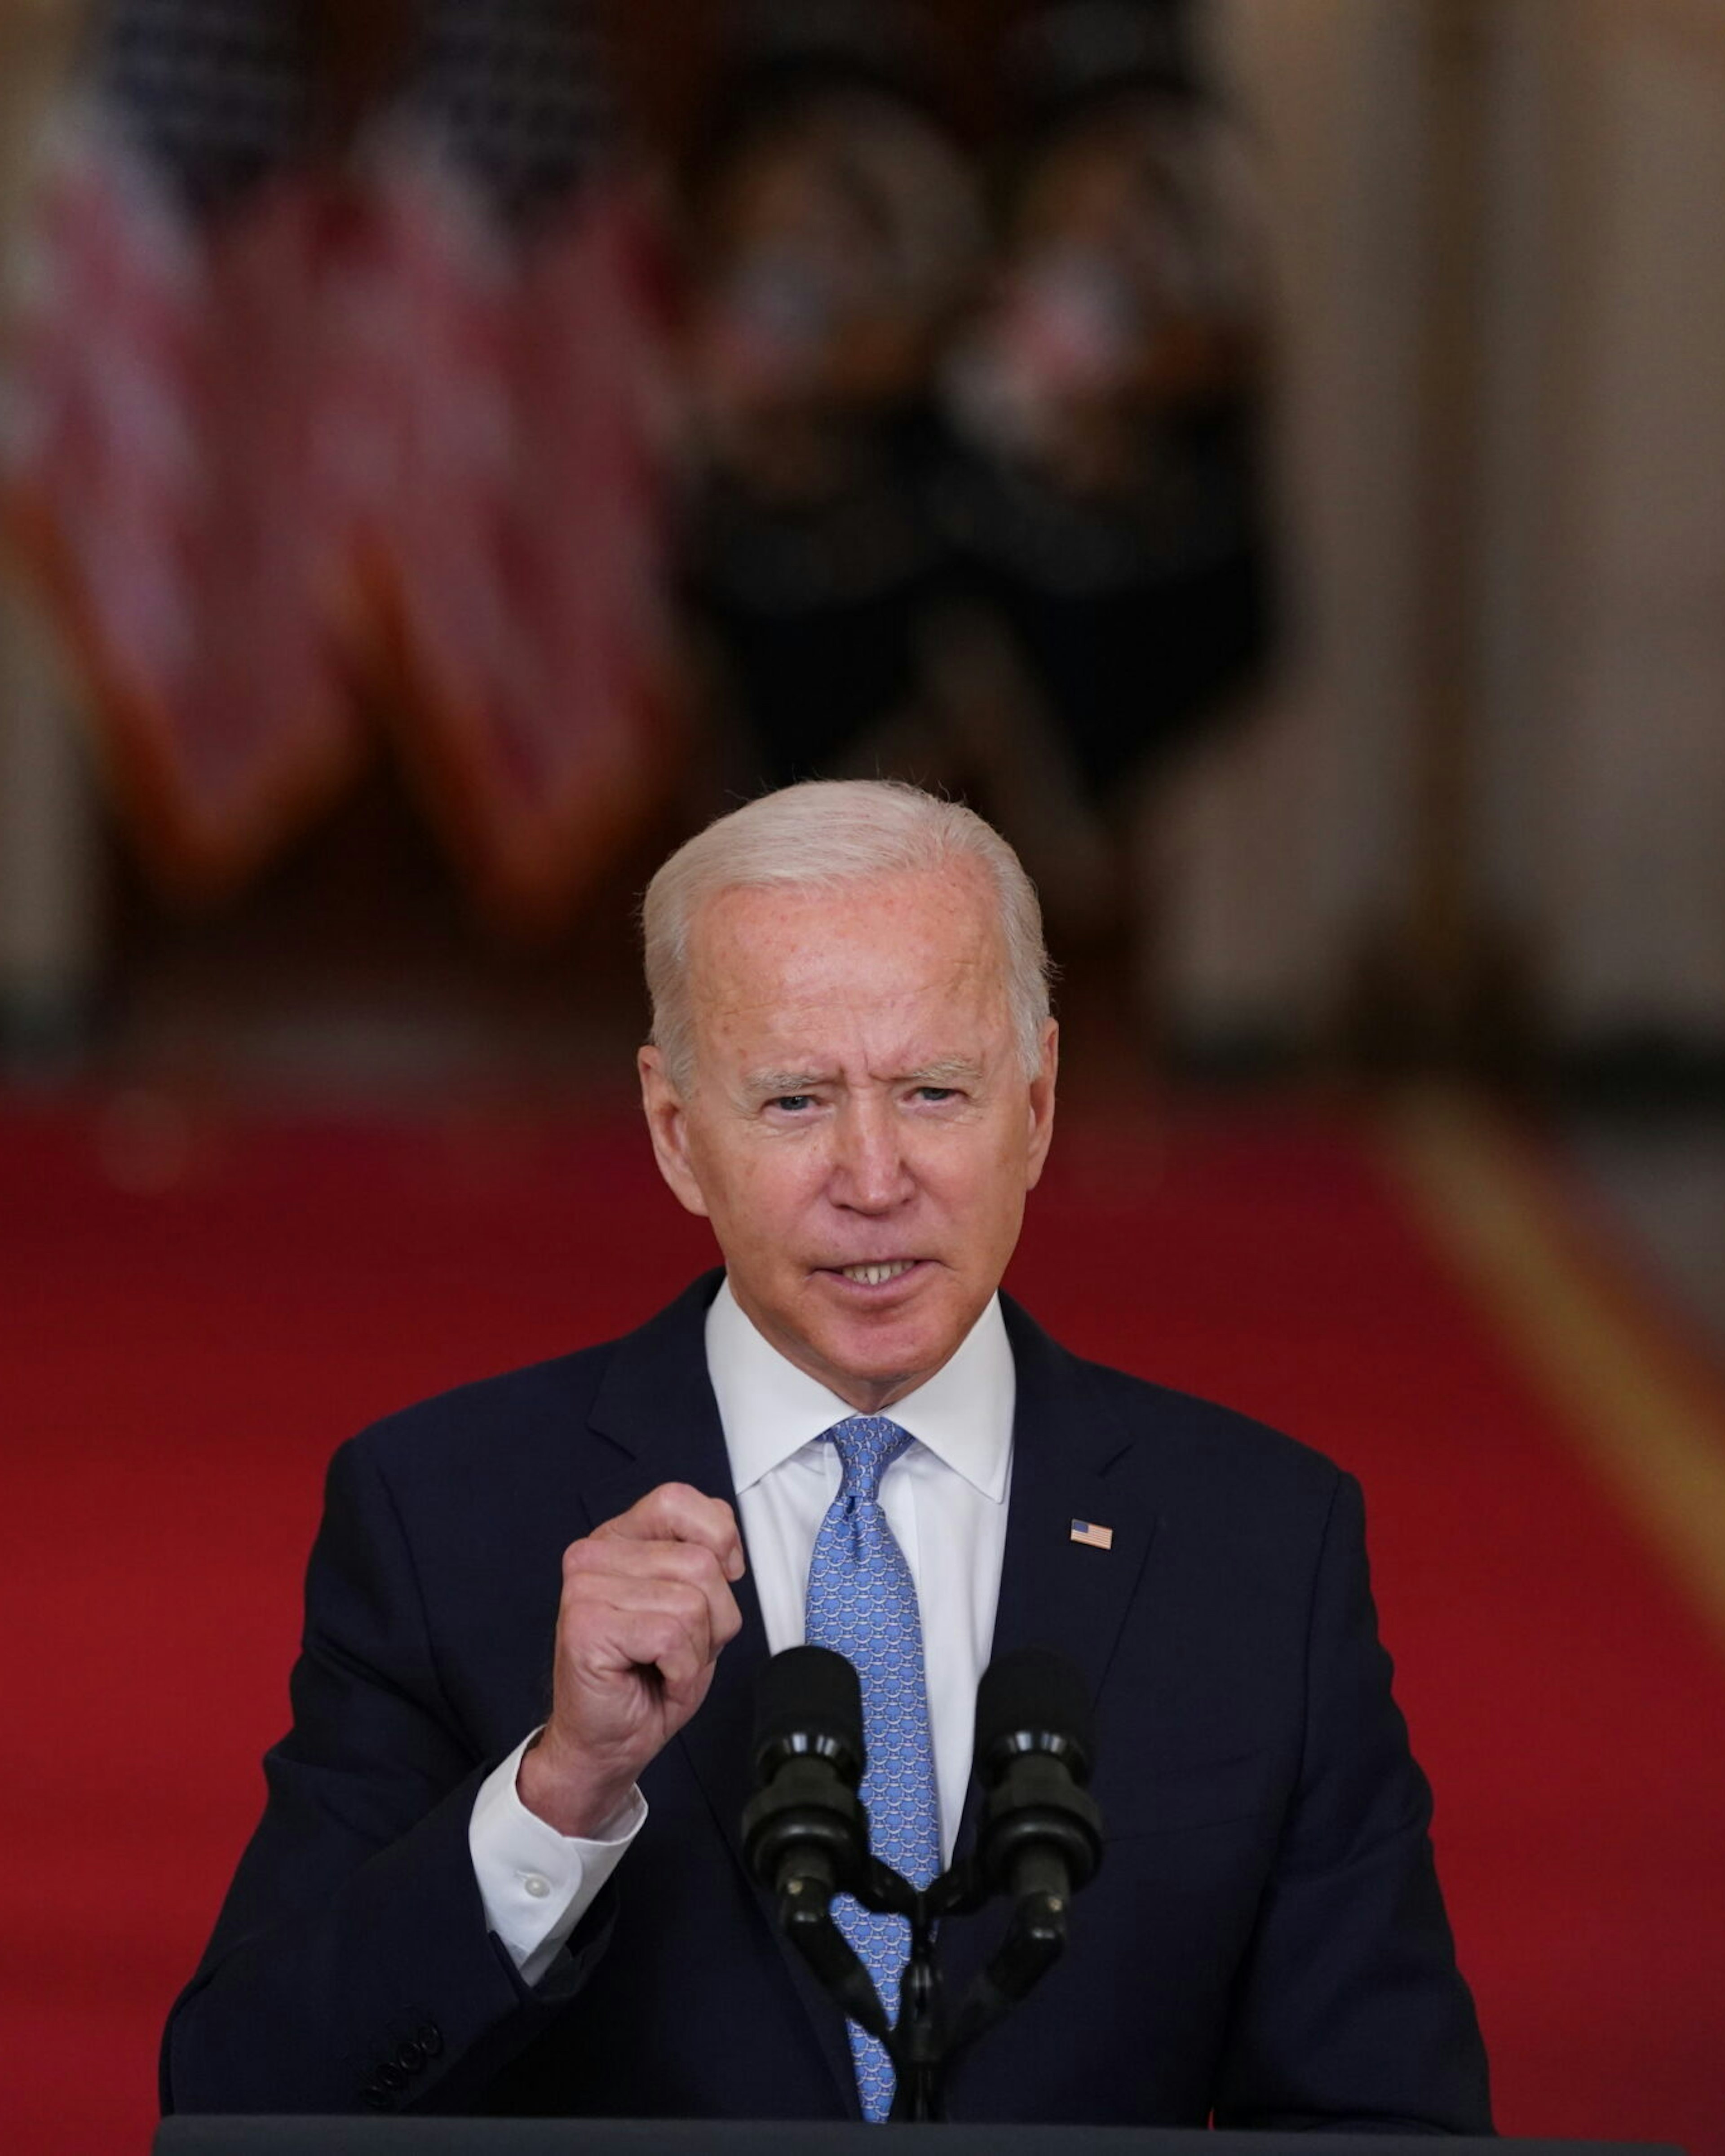 U.S. President Joe Biden speaks at the White House in Washington, D.C., U.S., on Tuesday, Aug. 31, 2021. The departure of the last U.S. military plane from Afghanistan left the region facing uncertainty, with the Taliban seeking to cement control of a nation shattered by two decades of war and an economy long dependent on foreign aid and opium sales. Photographer: Stefani Reynolds/Bloomberg via Getty Images